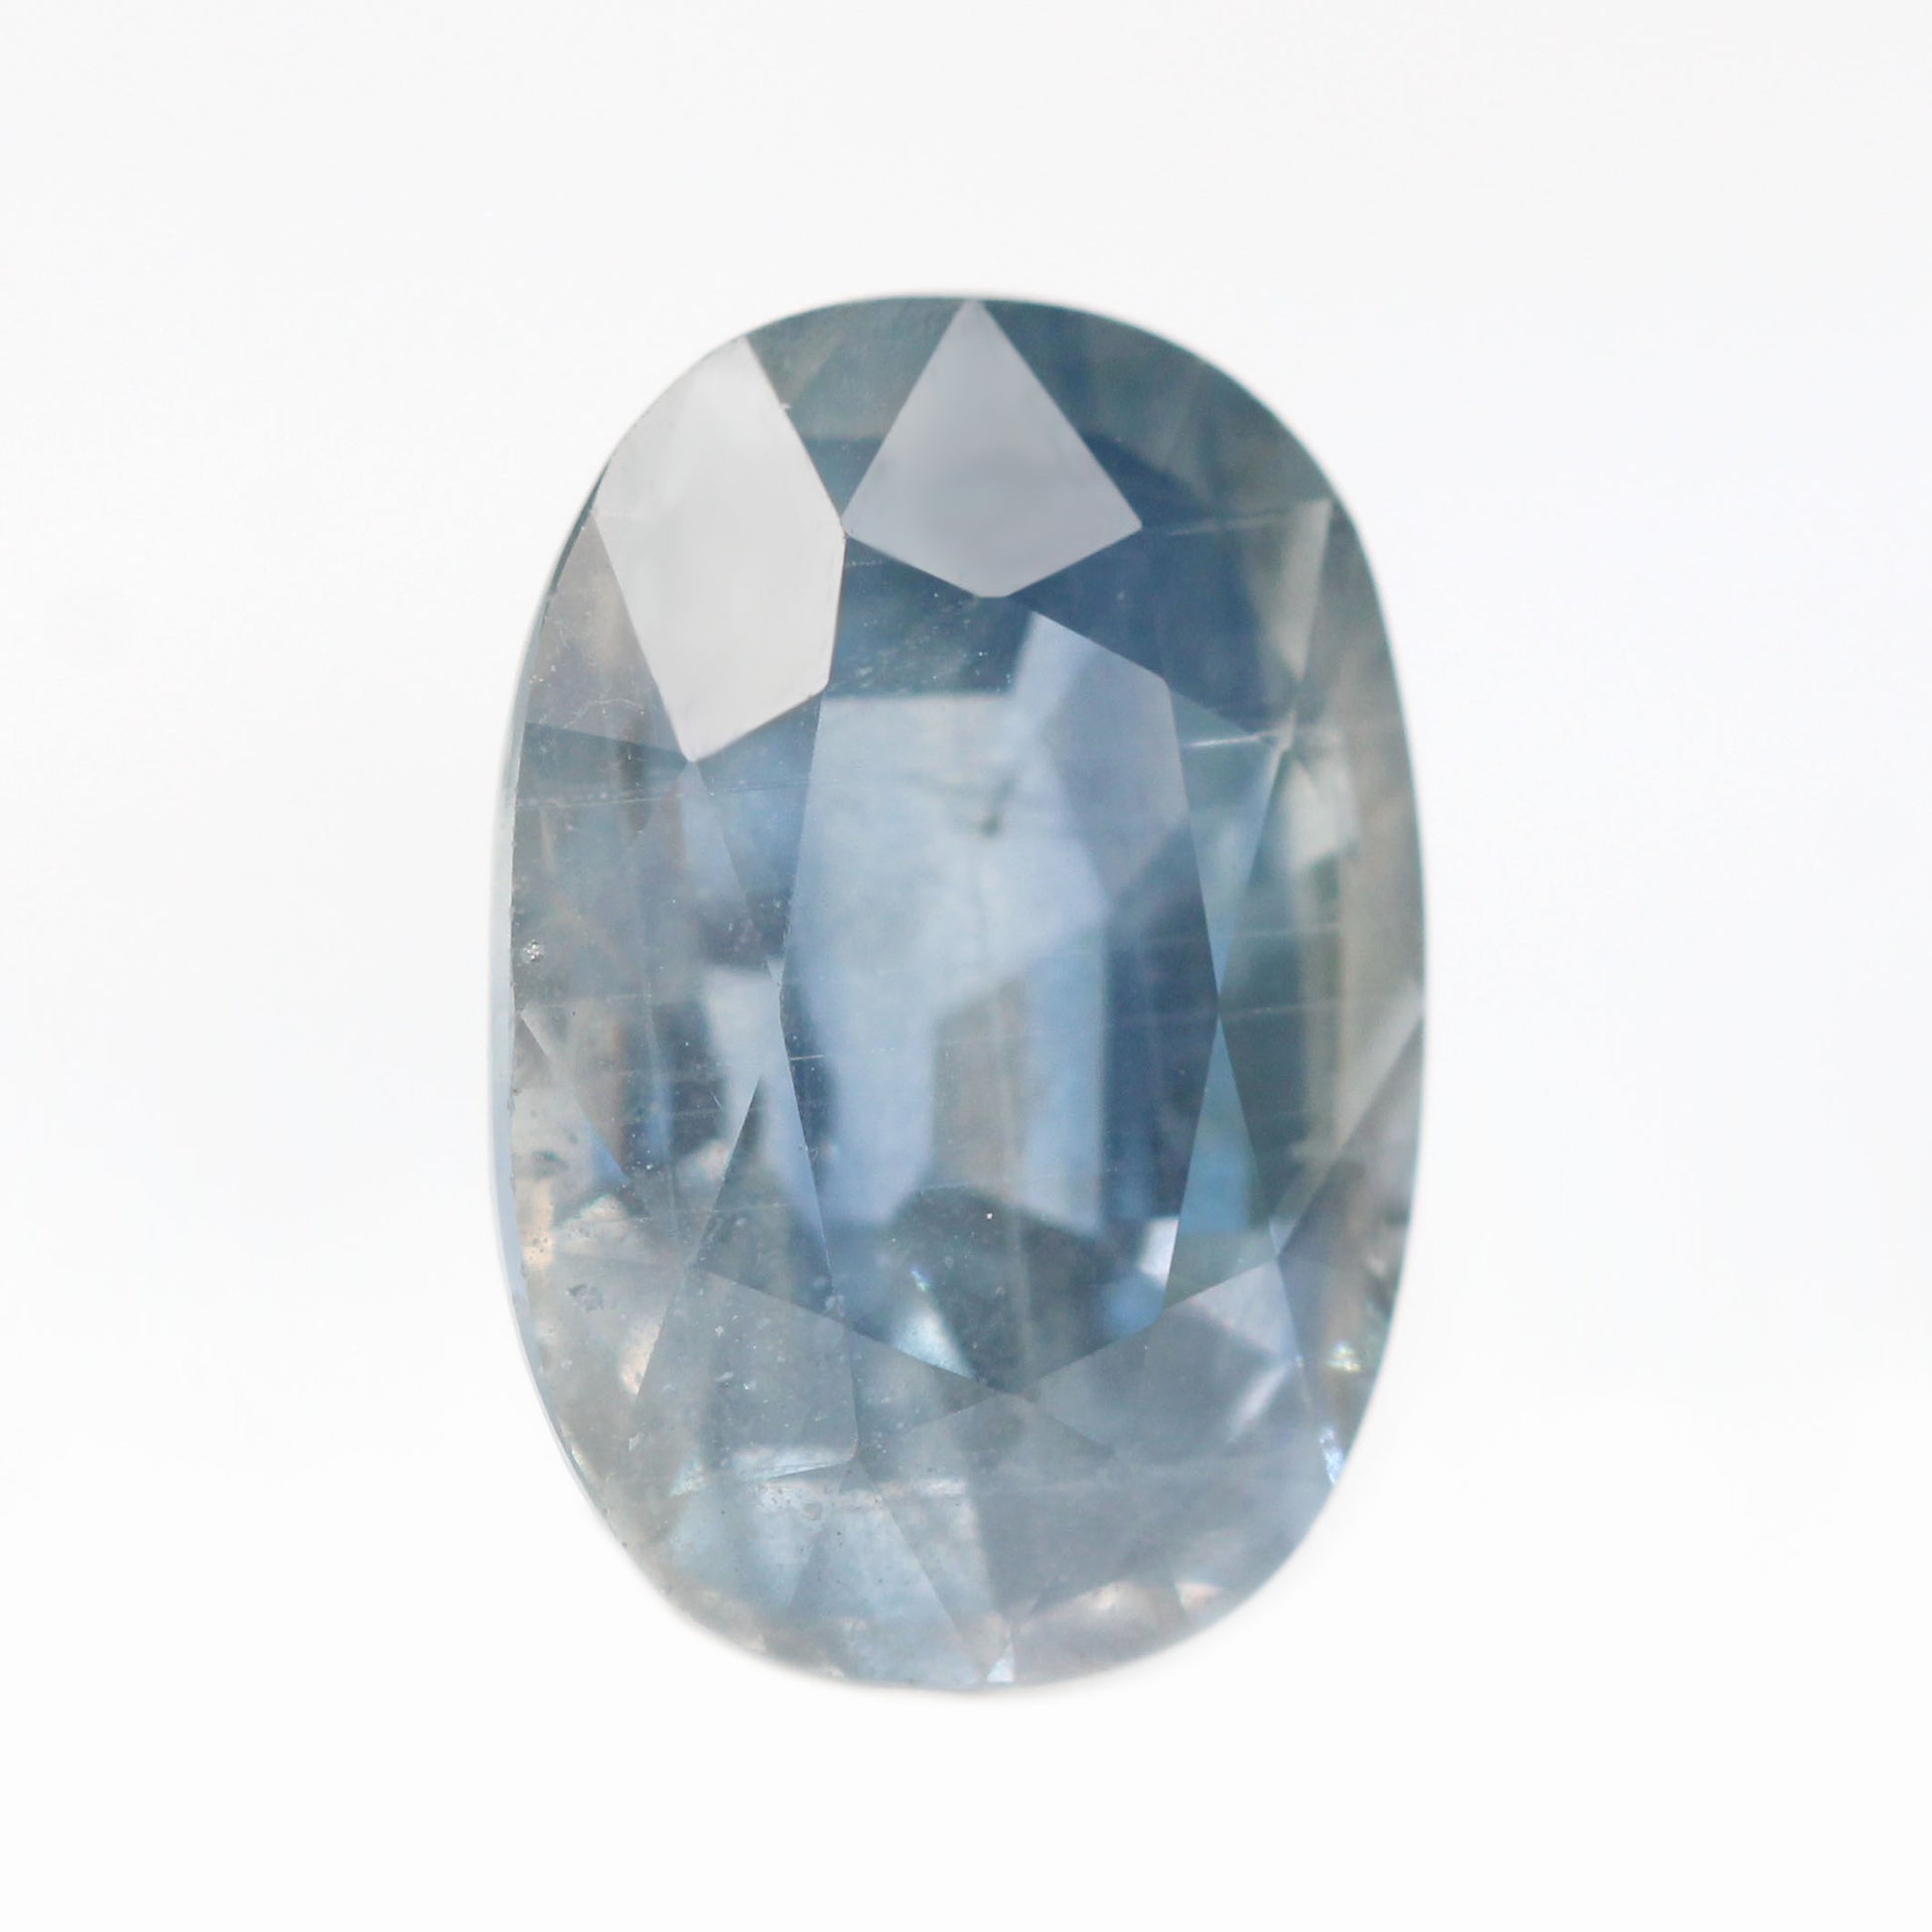 3.67 Carat Light Blue Oval Sapphire for Custom Work - Inventory Code BOS367 - Midwinter Co. Alternative Bridal Rings and Modern Fine Jewelry